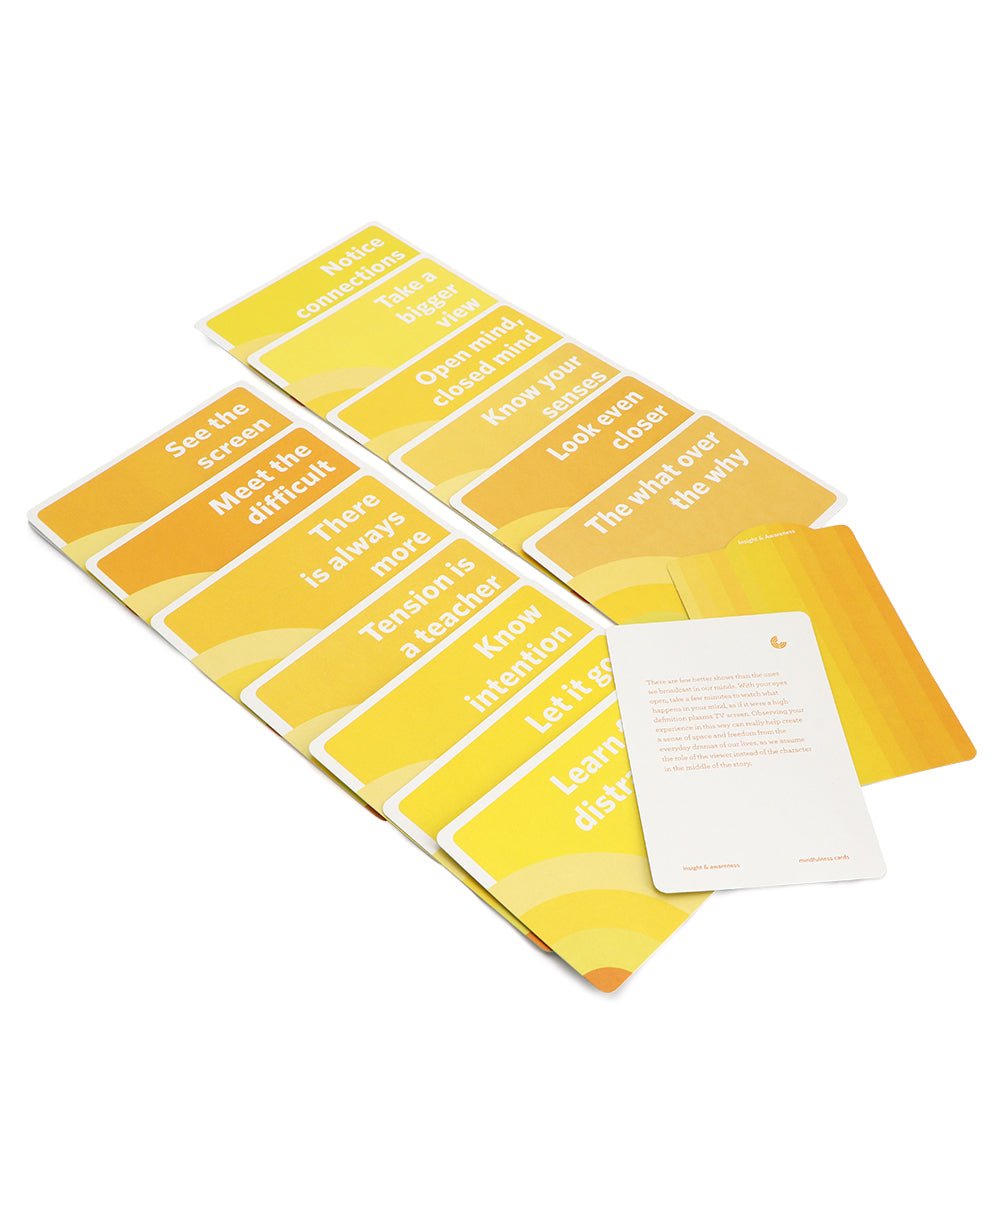 Simple Practices For Everyday Life, Mindfulness Cards Set - Card Games